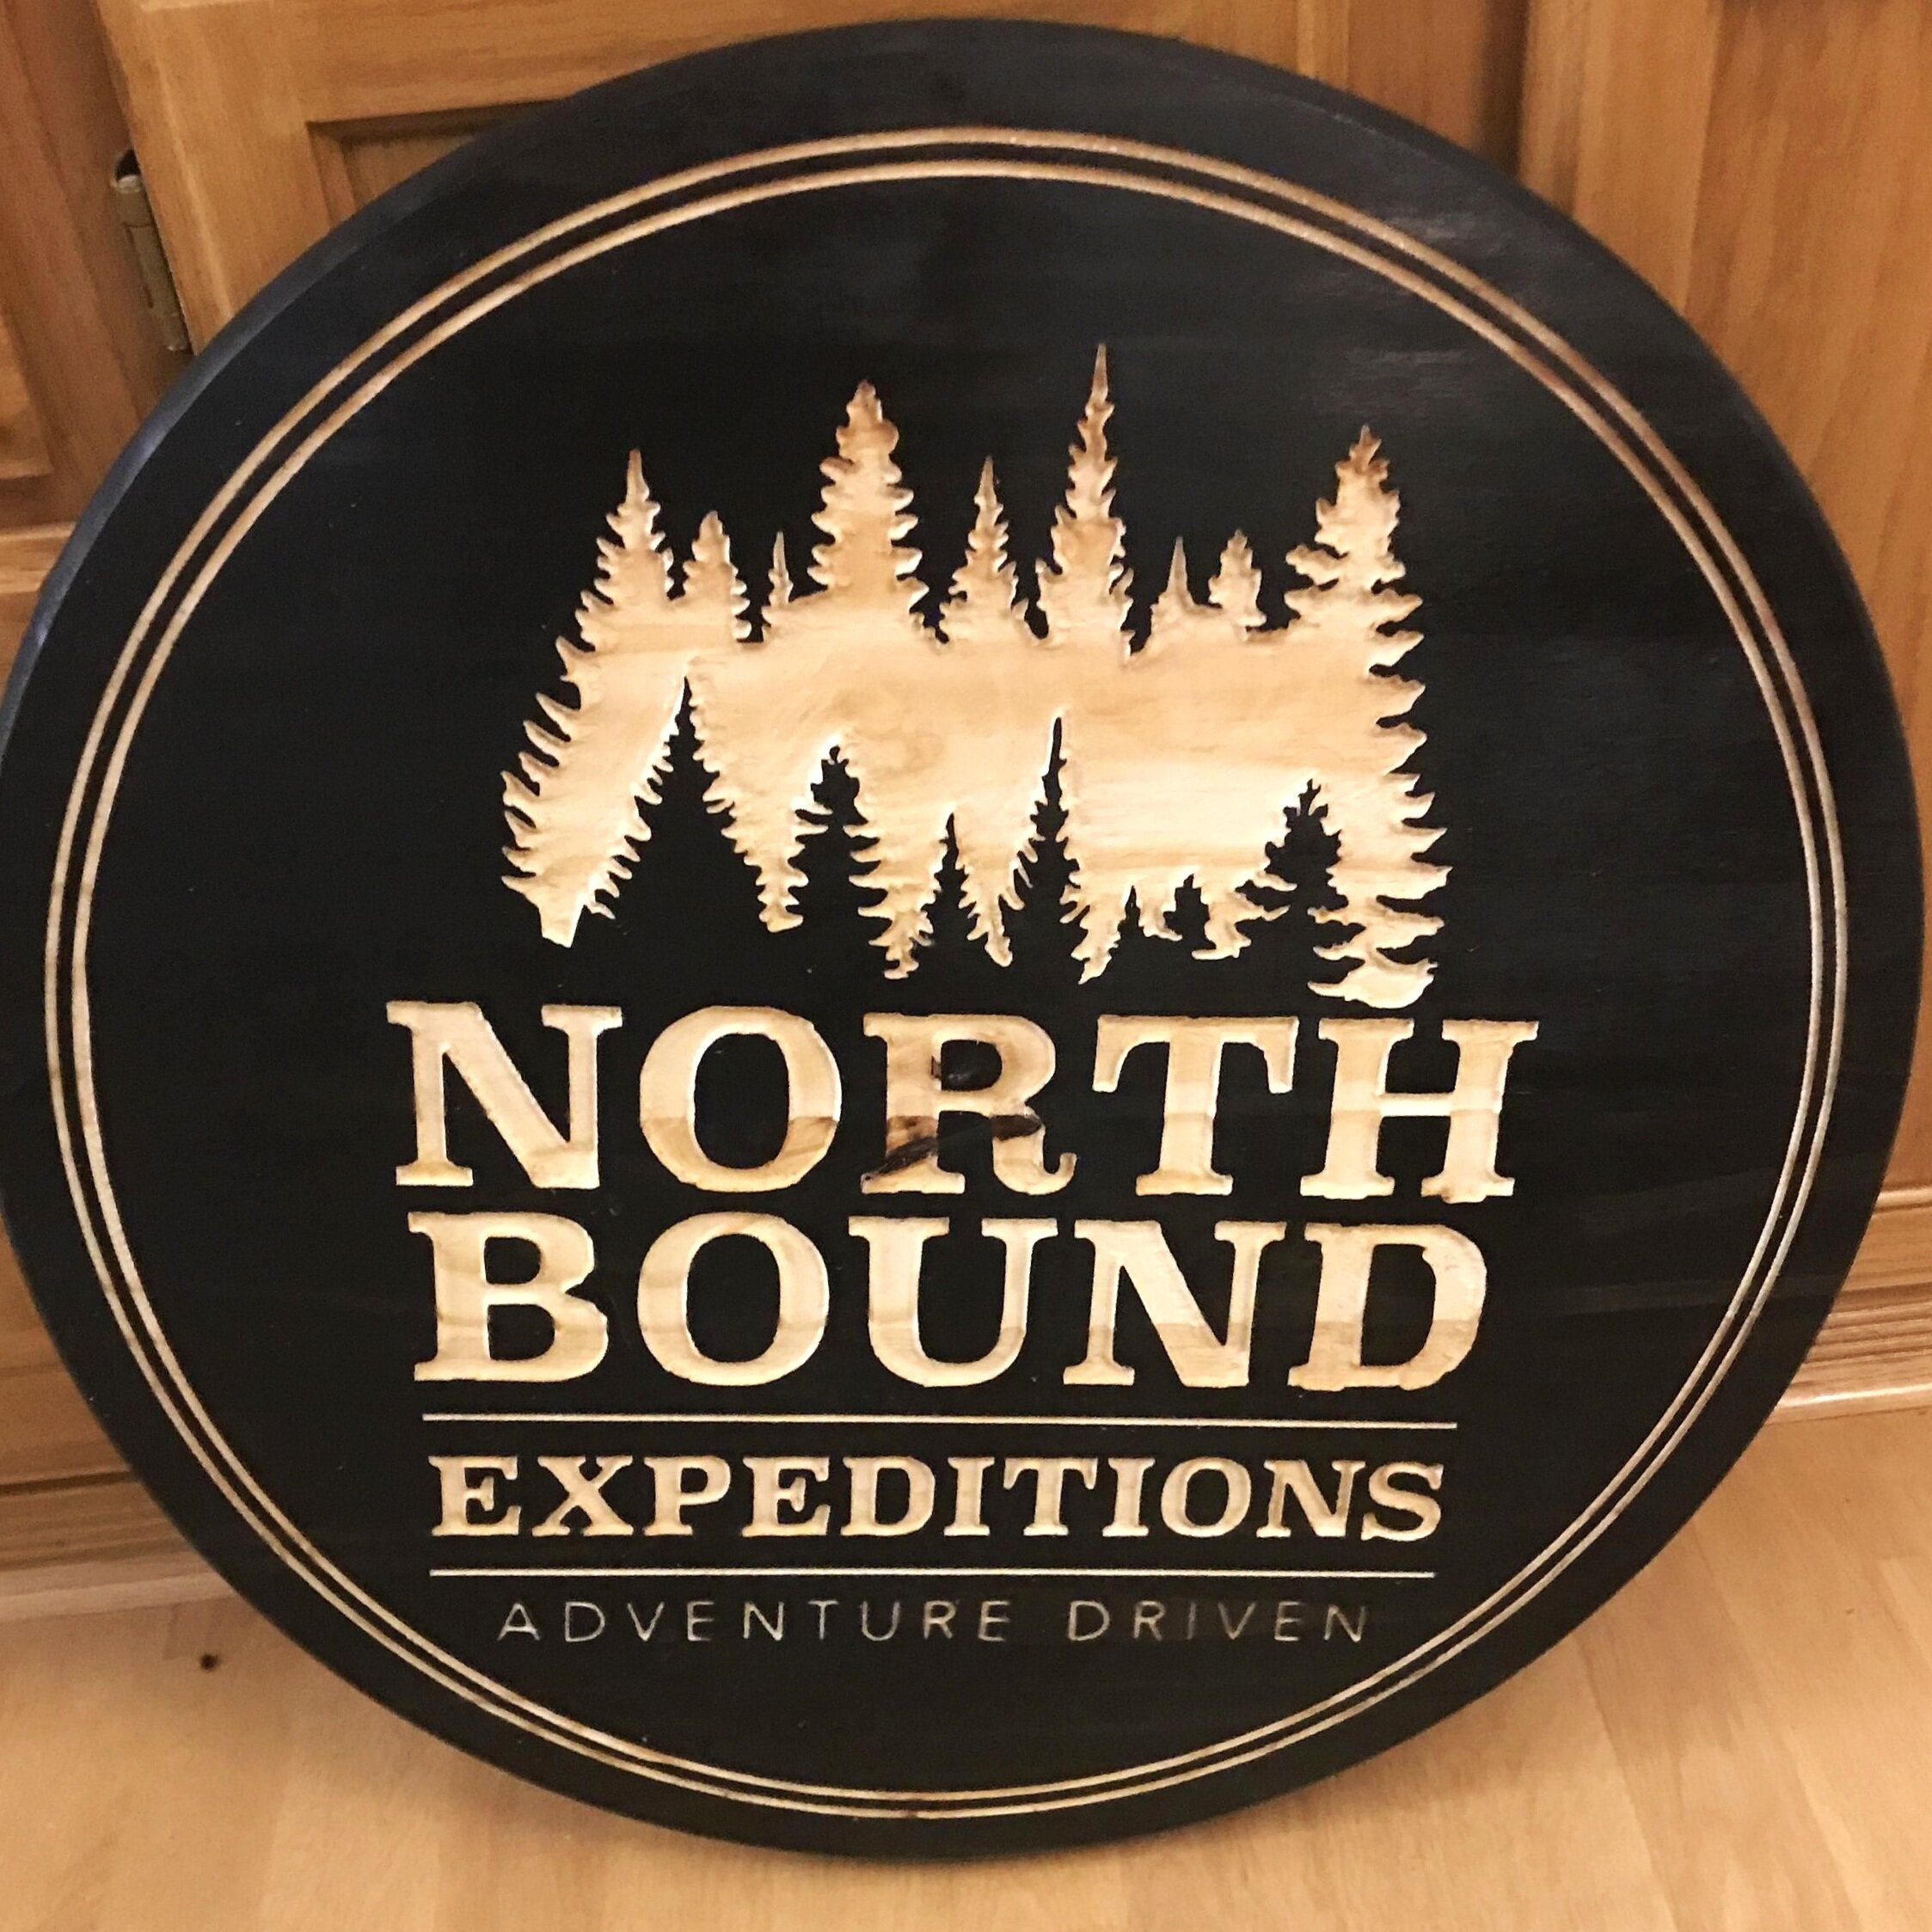 North+Bound+Expeditions.jpg